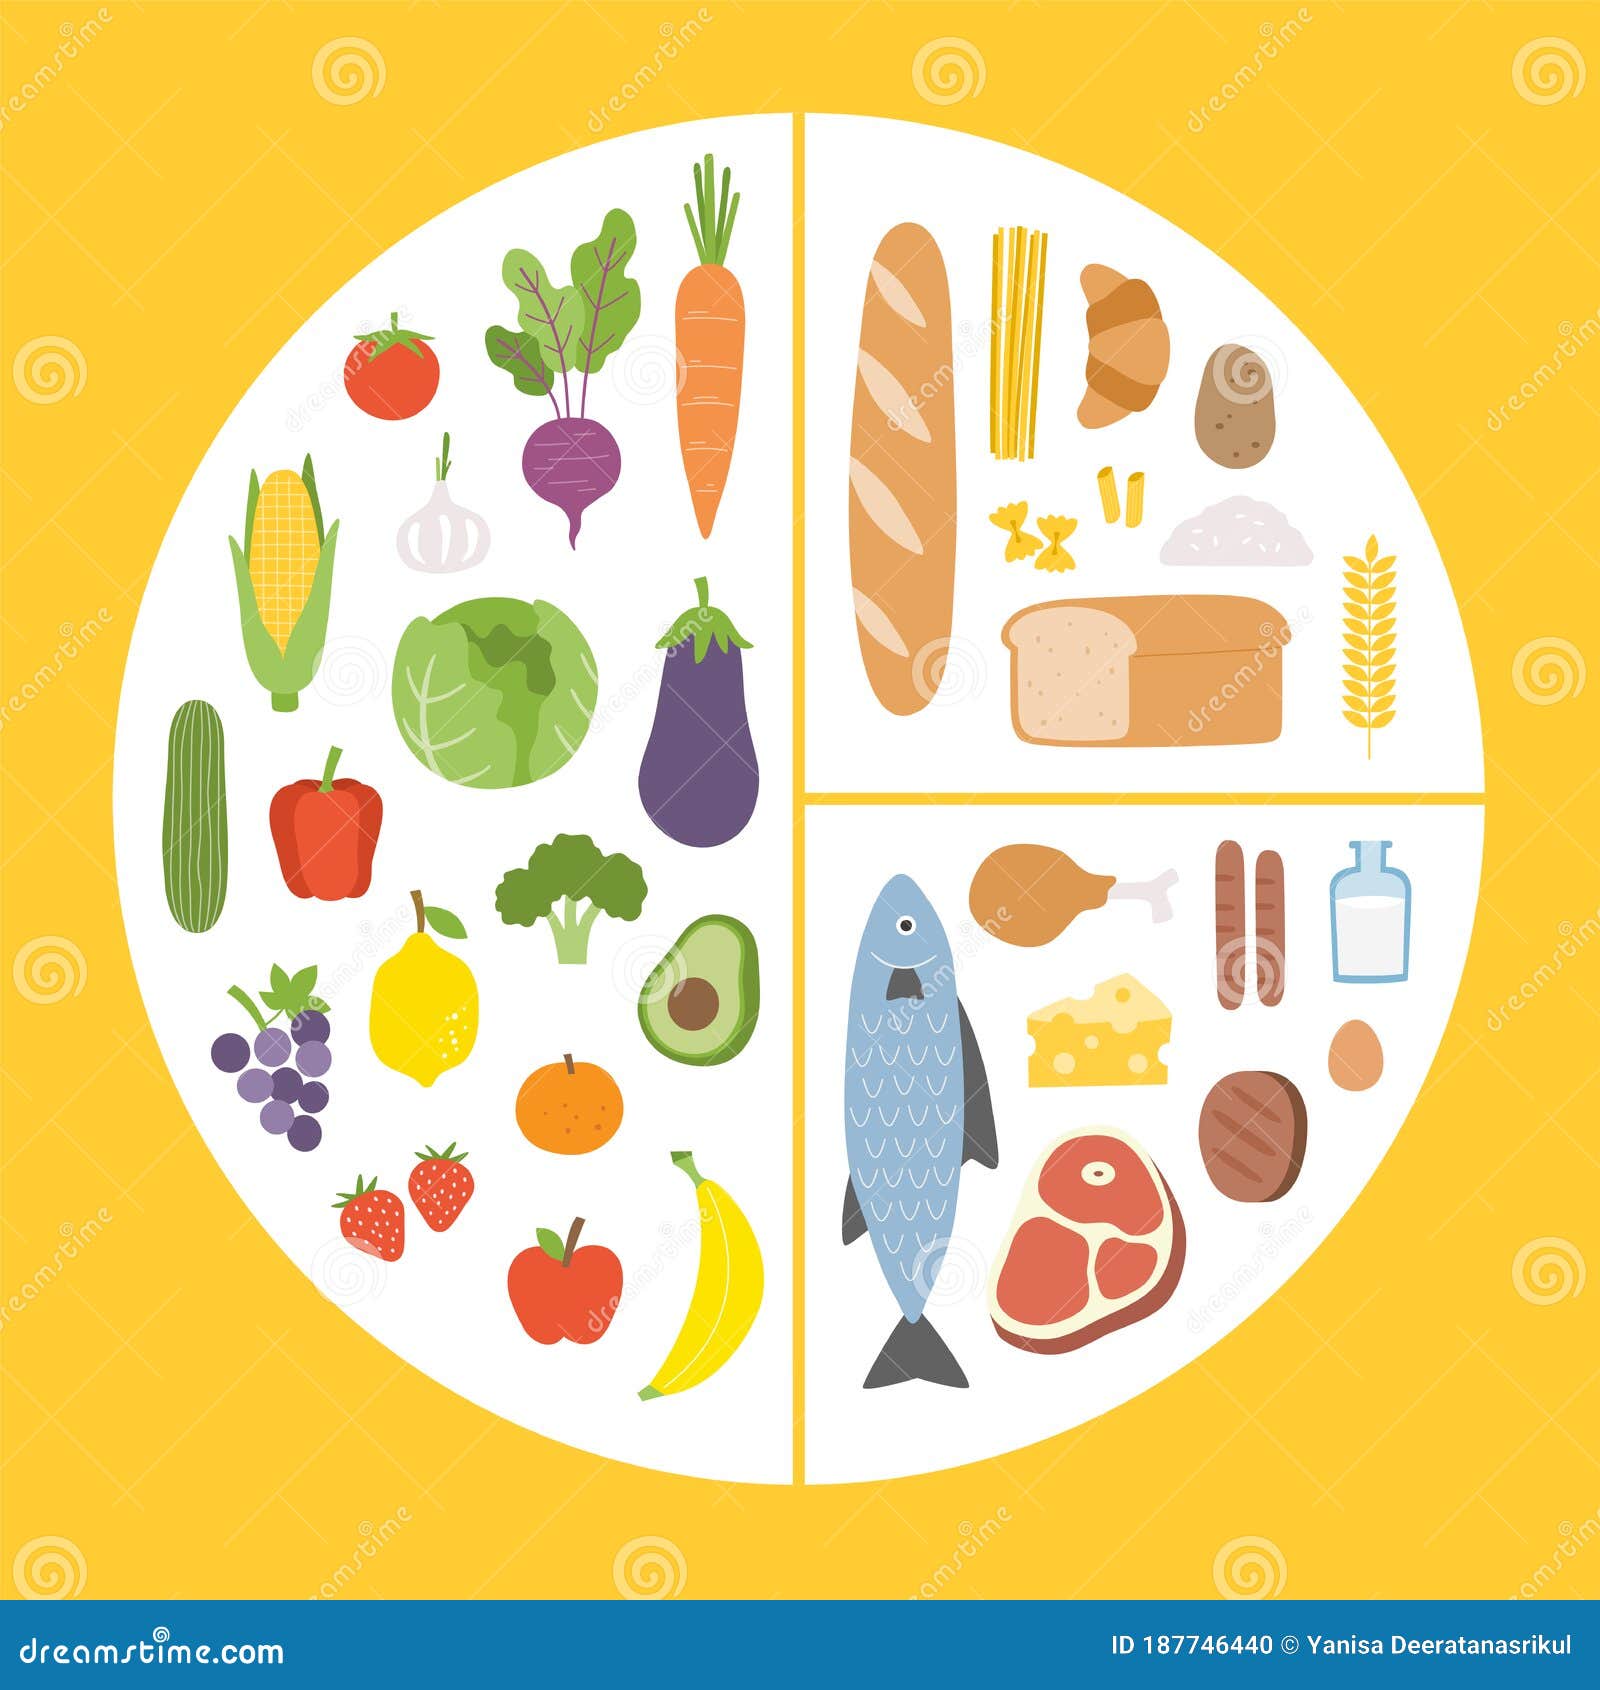 healthy eating tips. infographic chart of food balance with proper nutrition proportions.